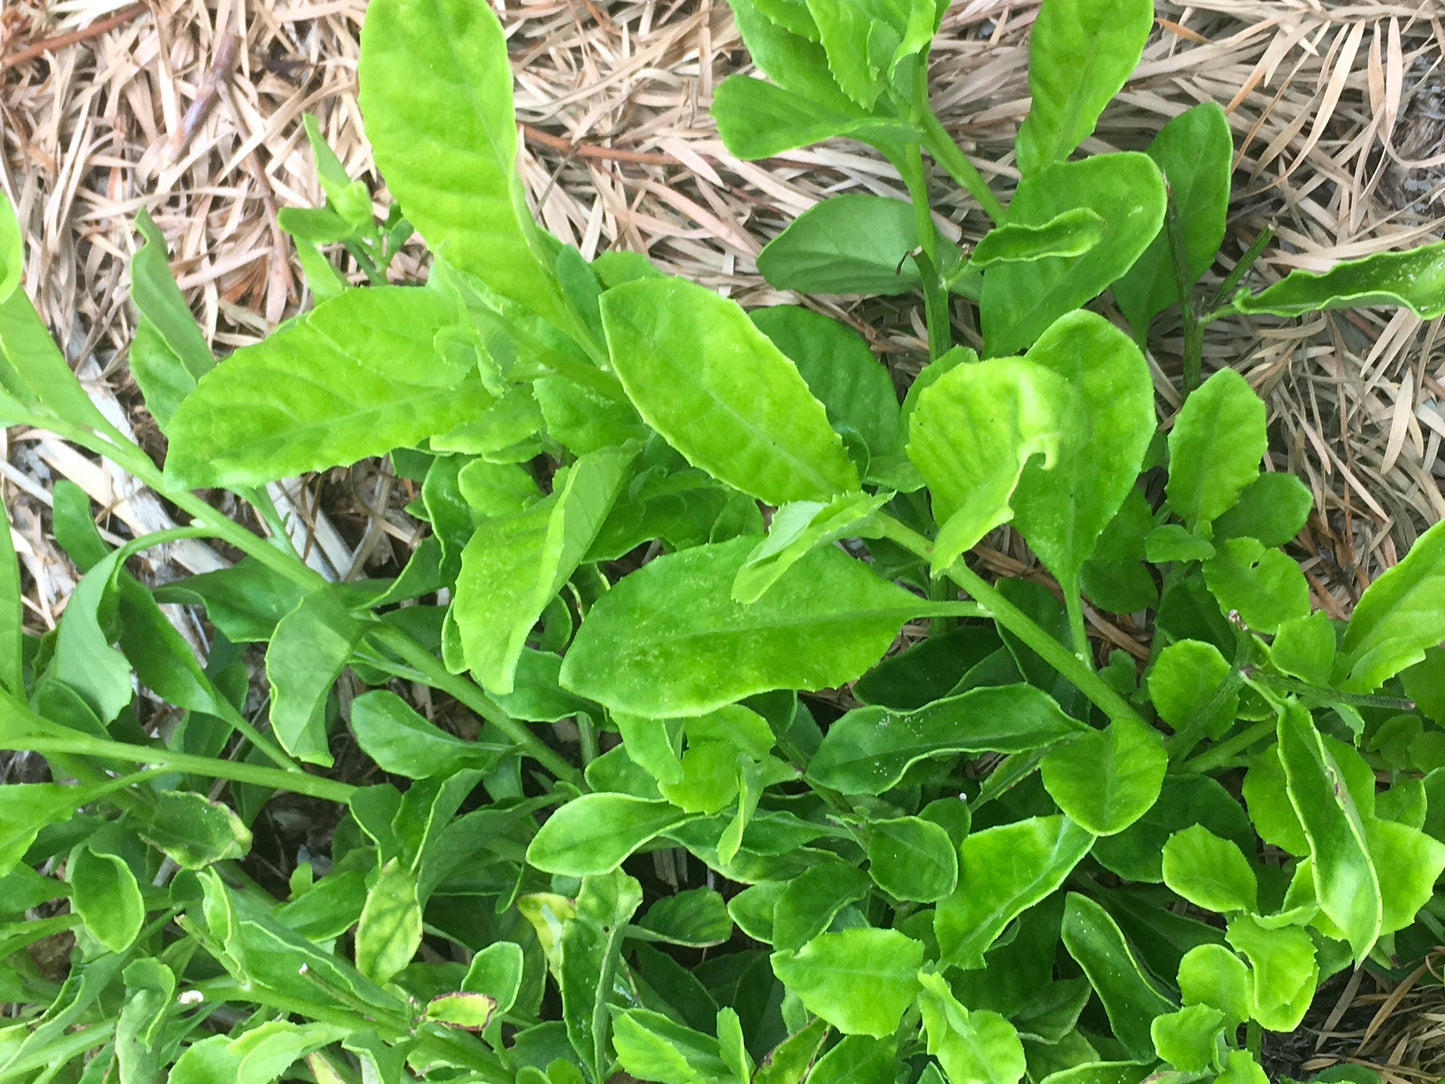 Perennial Spinach Sale- 1 Longevity Spinach (Gynura Procumbens) and 1 Okinawa Spinach LIVE PLANTS